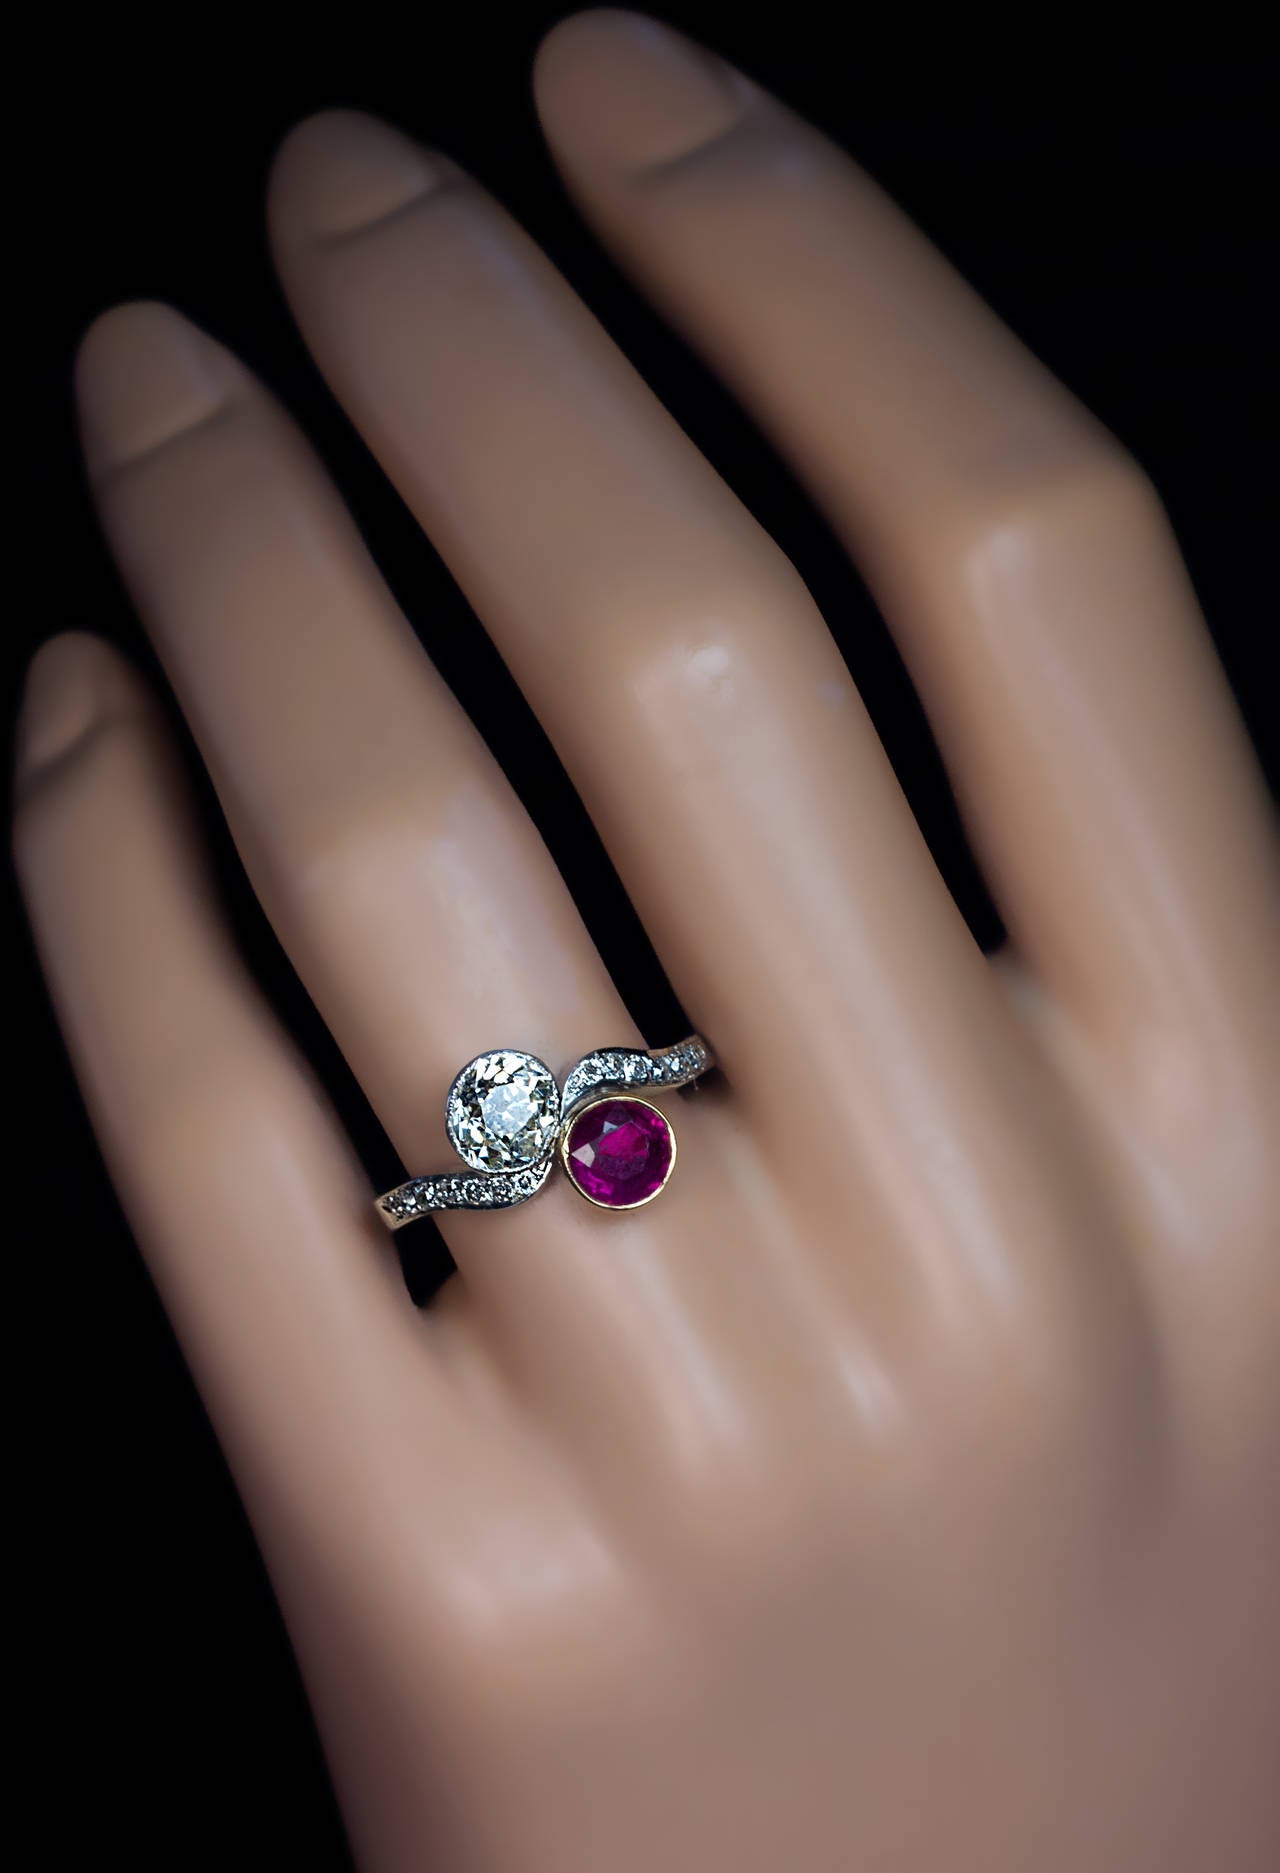 1920s / 1930s

A platinum bypass / moi et toi engagement ring centered with a round faceted ruby (5.8 x 2.9 mm, approximately 0.70 ct) and an old cushion cut diamond (6 x 5.4 x 3.95 mm, approximately 1.15 ct), shoulders set with 14 old European